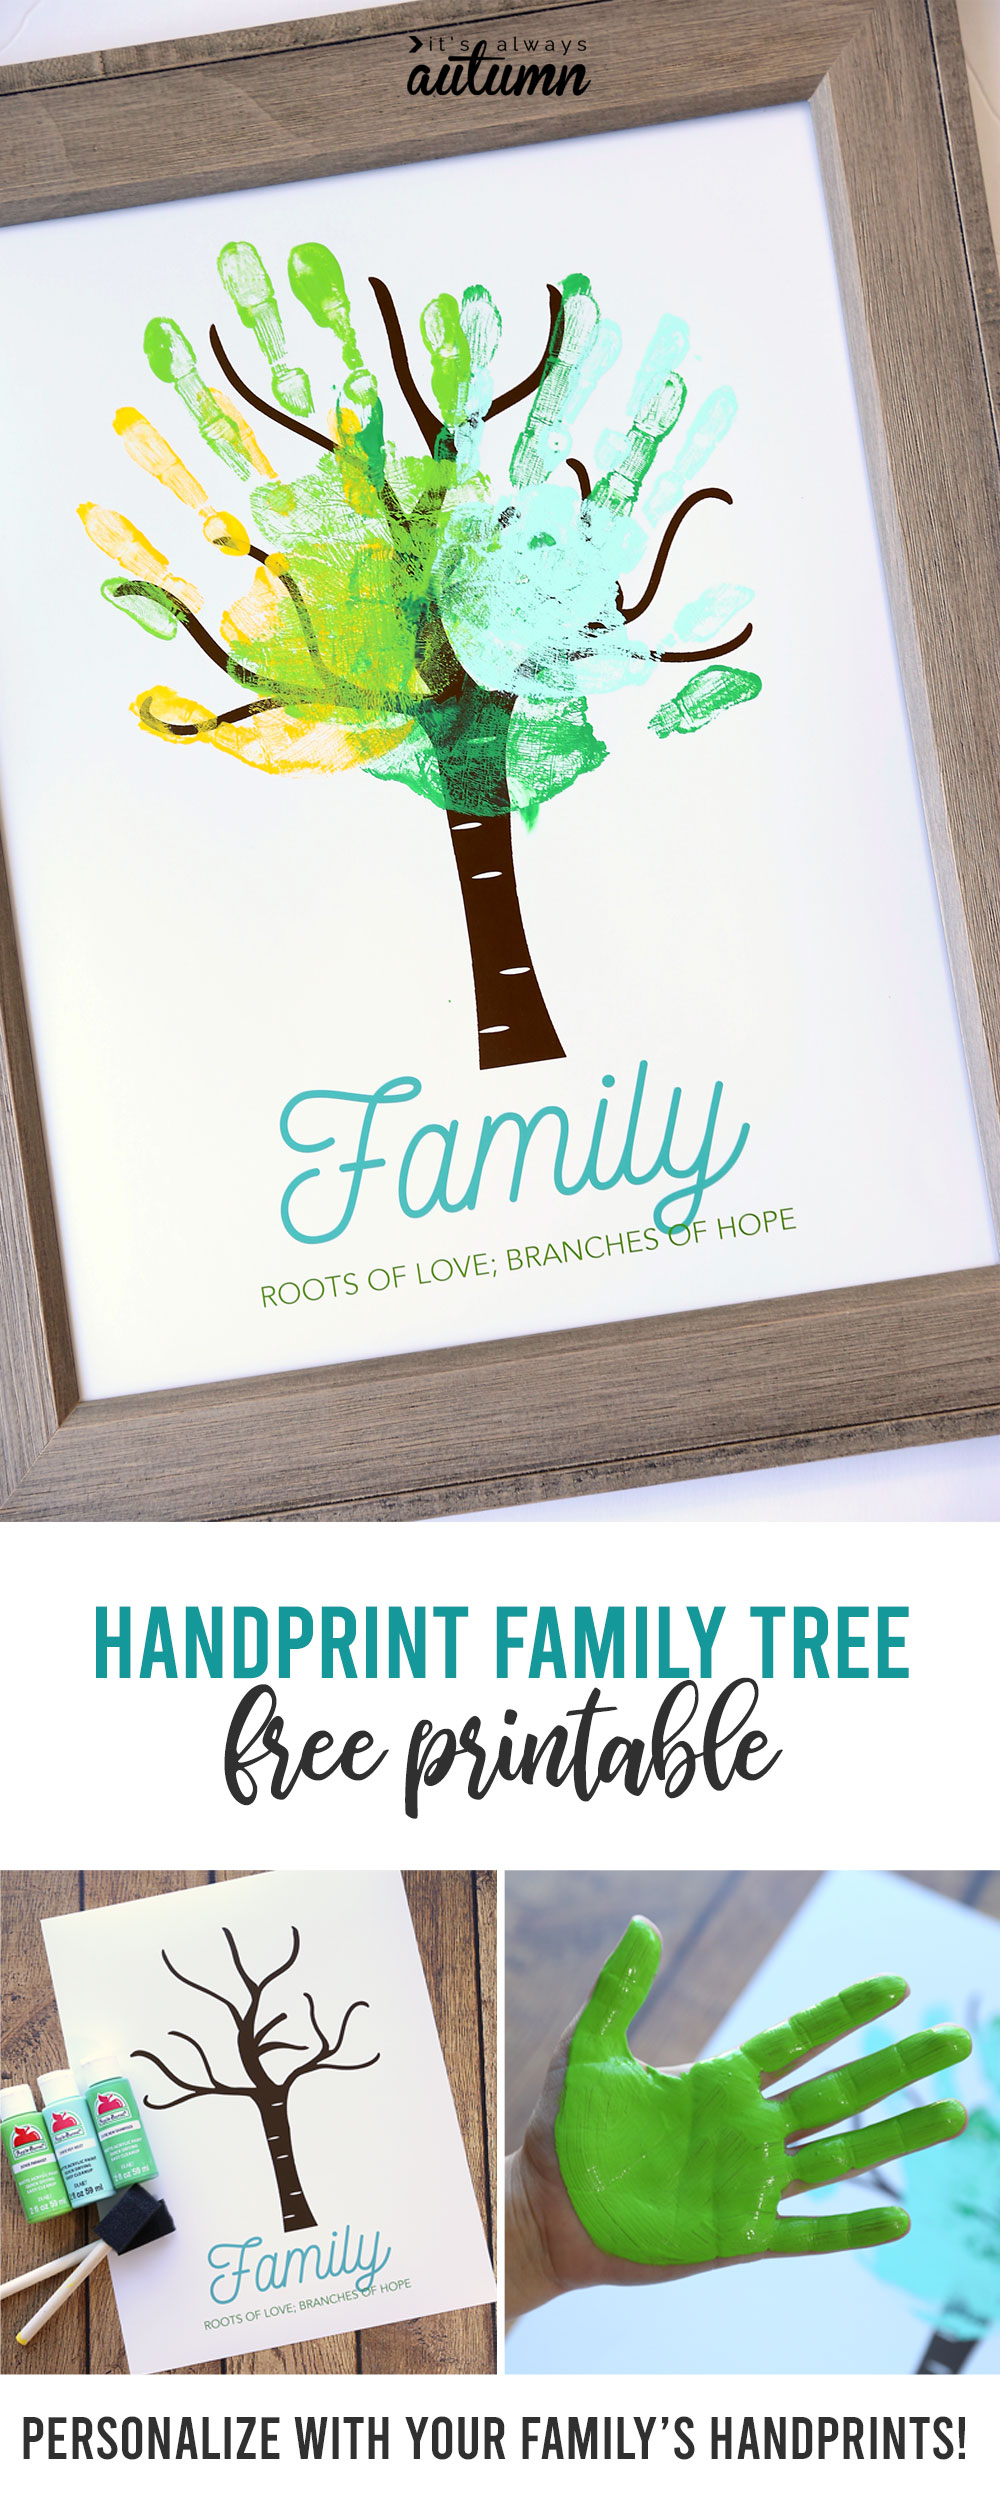 Family tree with handprints for the leaves